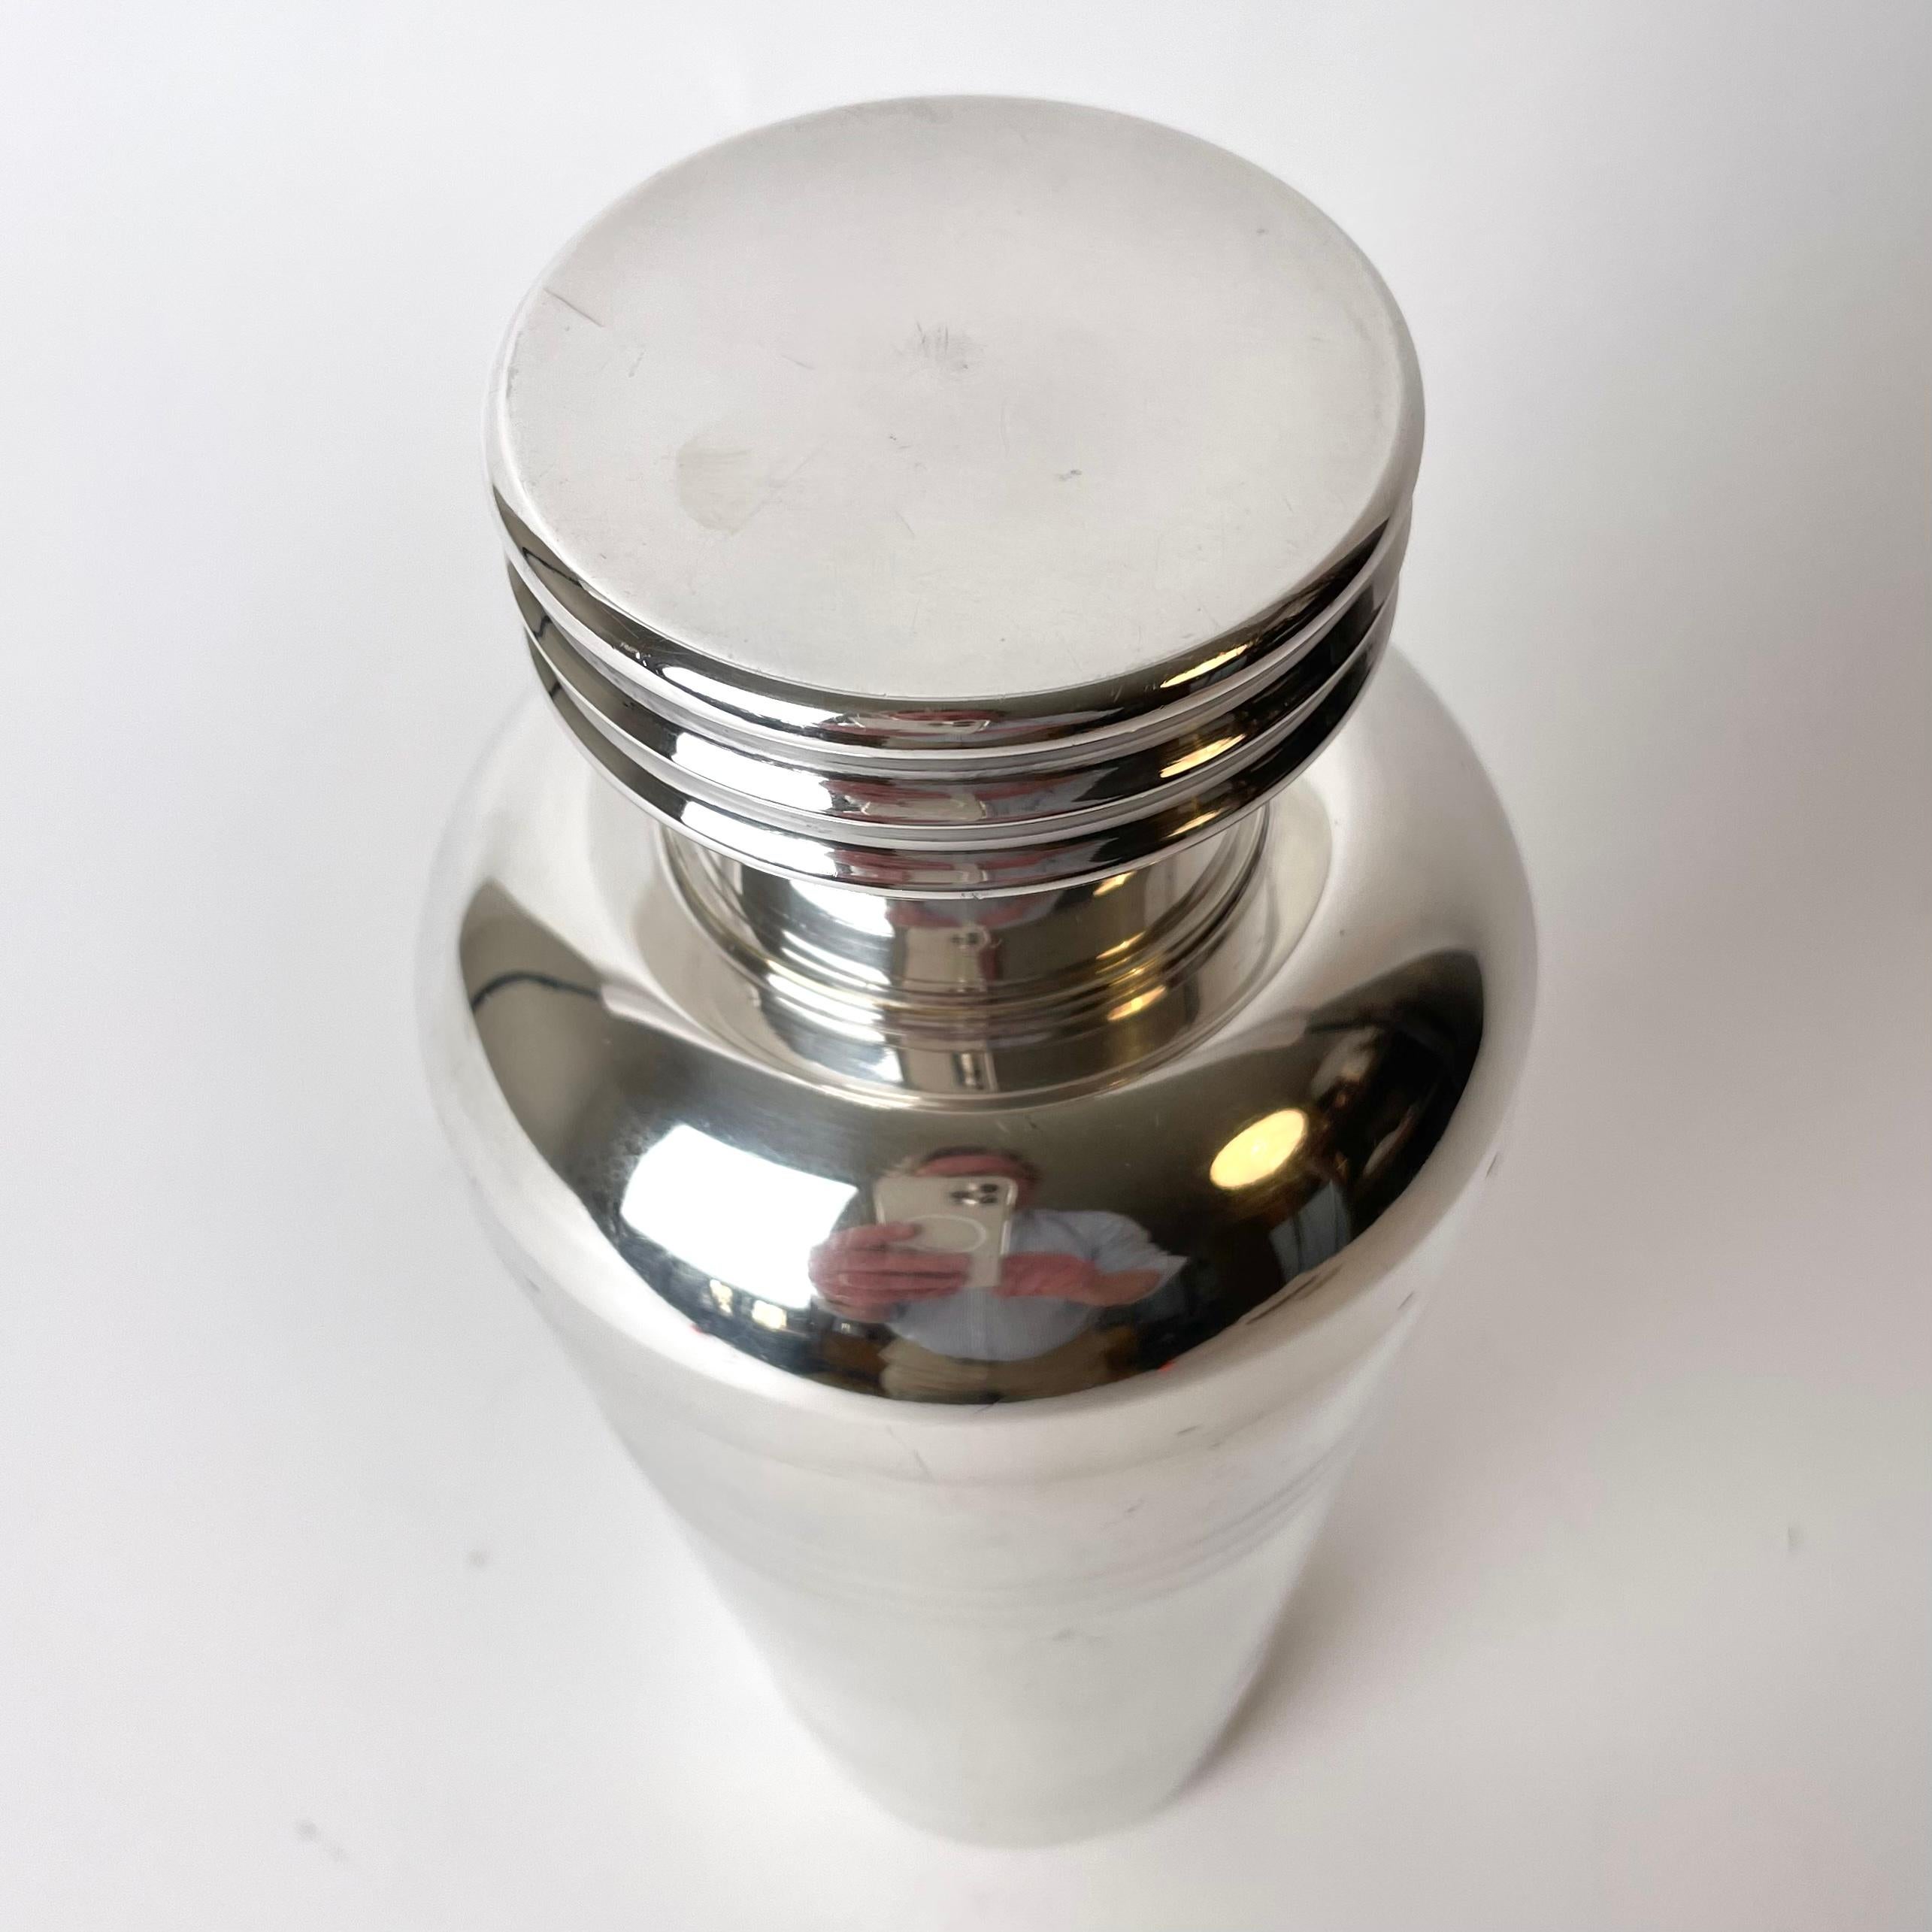 Early 20th Century Large Art Deco Silver Plated Cocktail Shaker from the 1920s